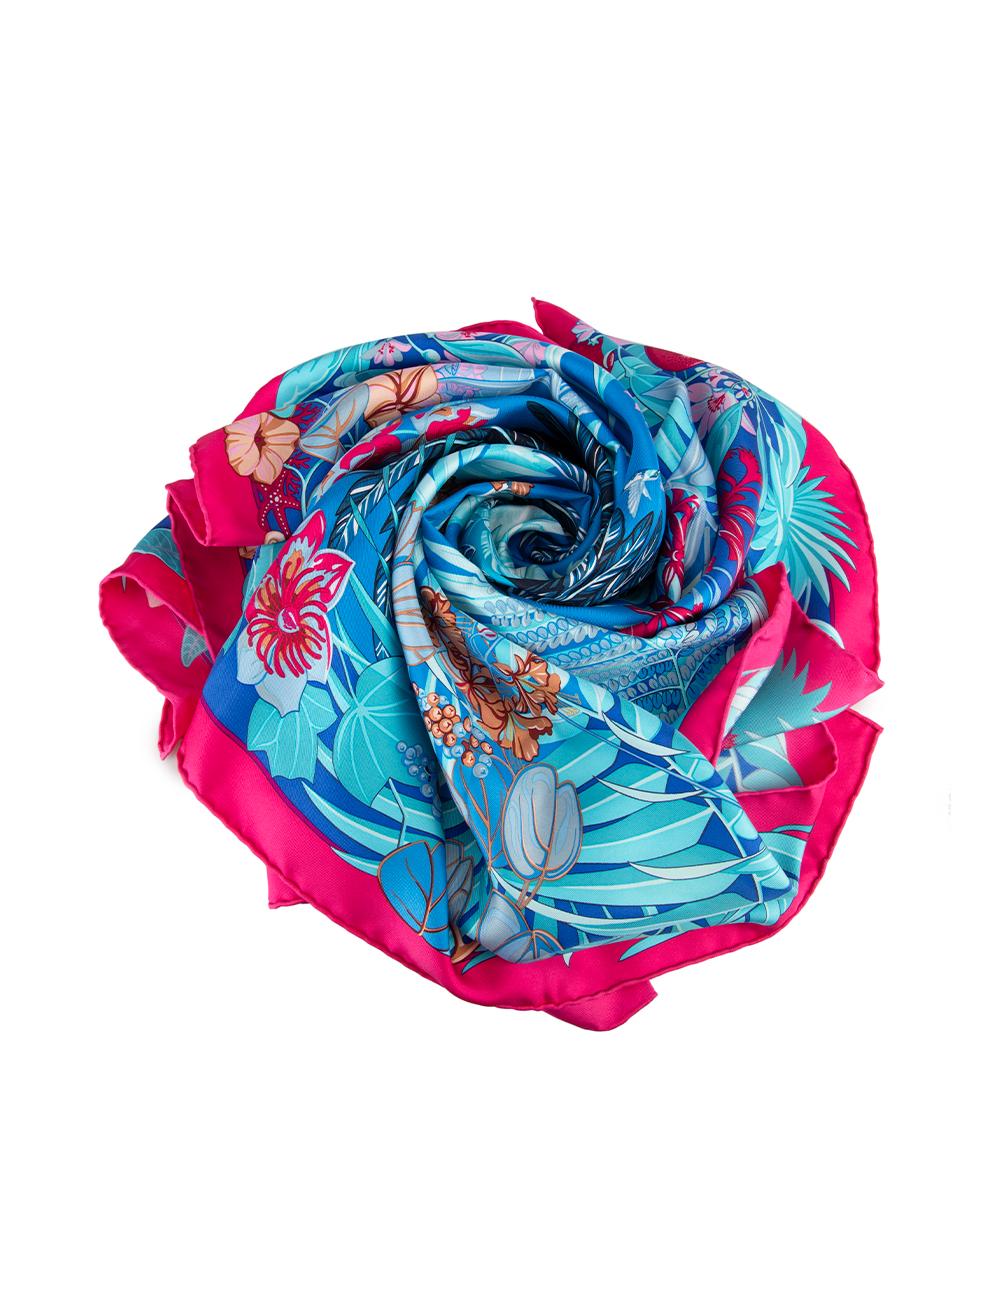 CONDITION is Never Worn. No visible wear to scarf is evident on this used Hermès designer resale item. This item comes with original box.



Details


Blue and pink

Silk

Square scarf

Flamingo party printed





Made in France



Composition

100%